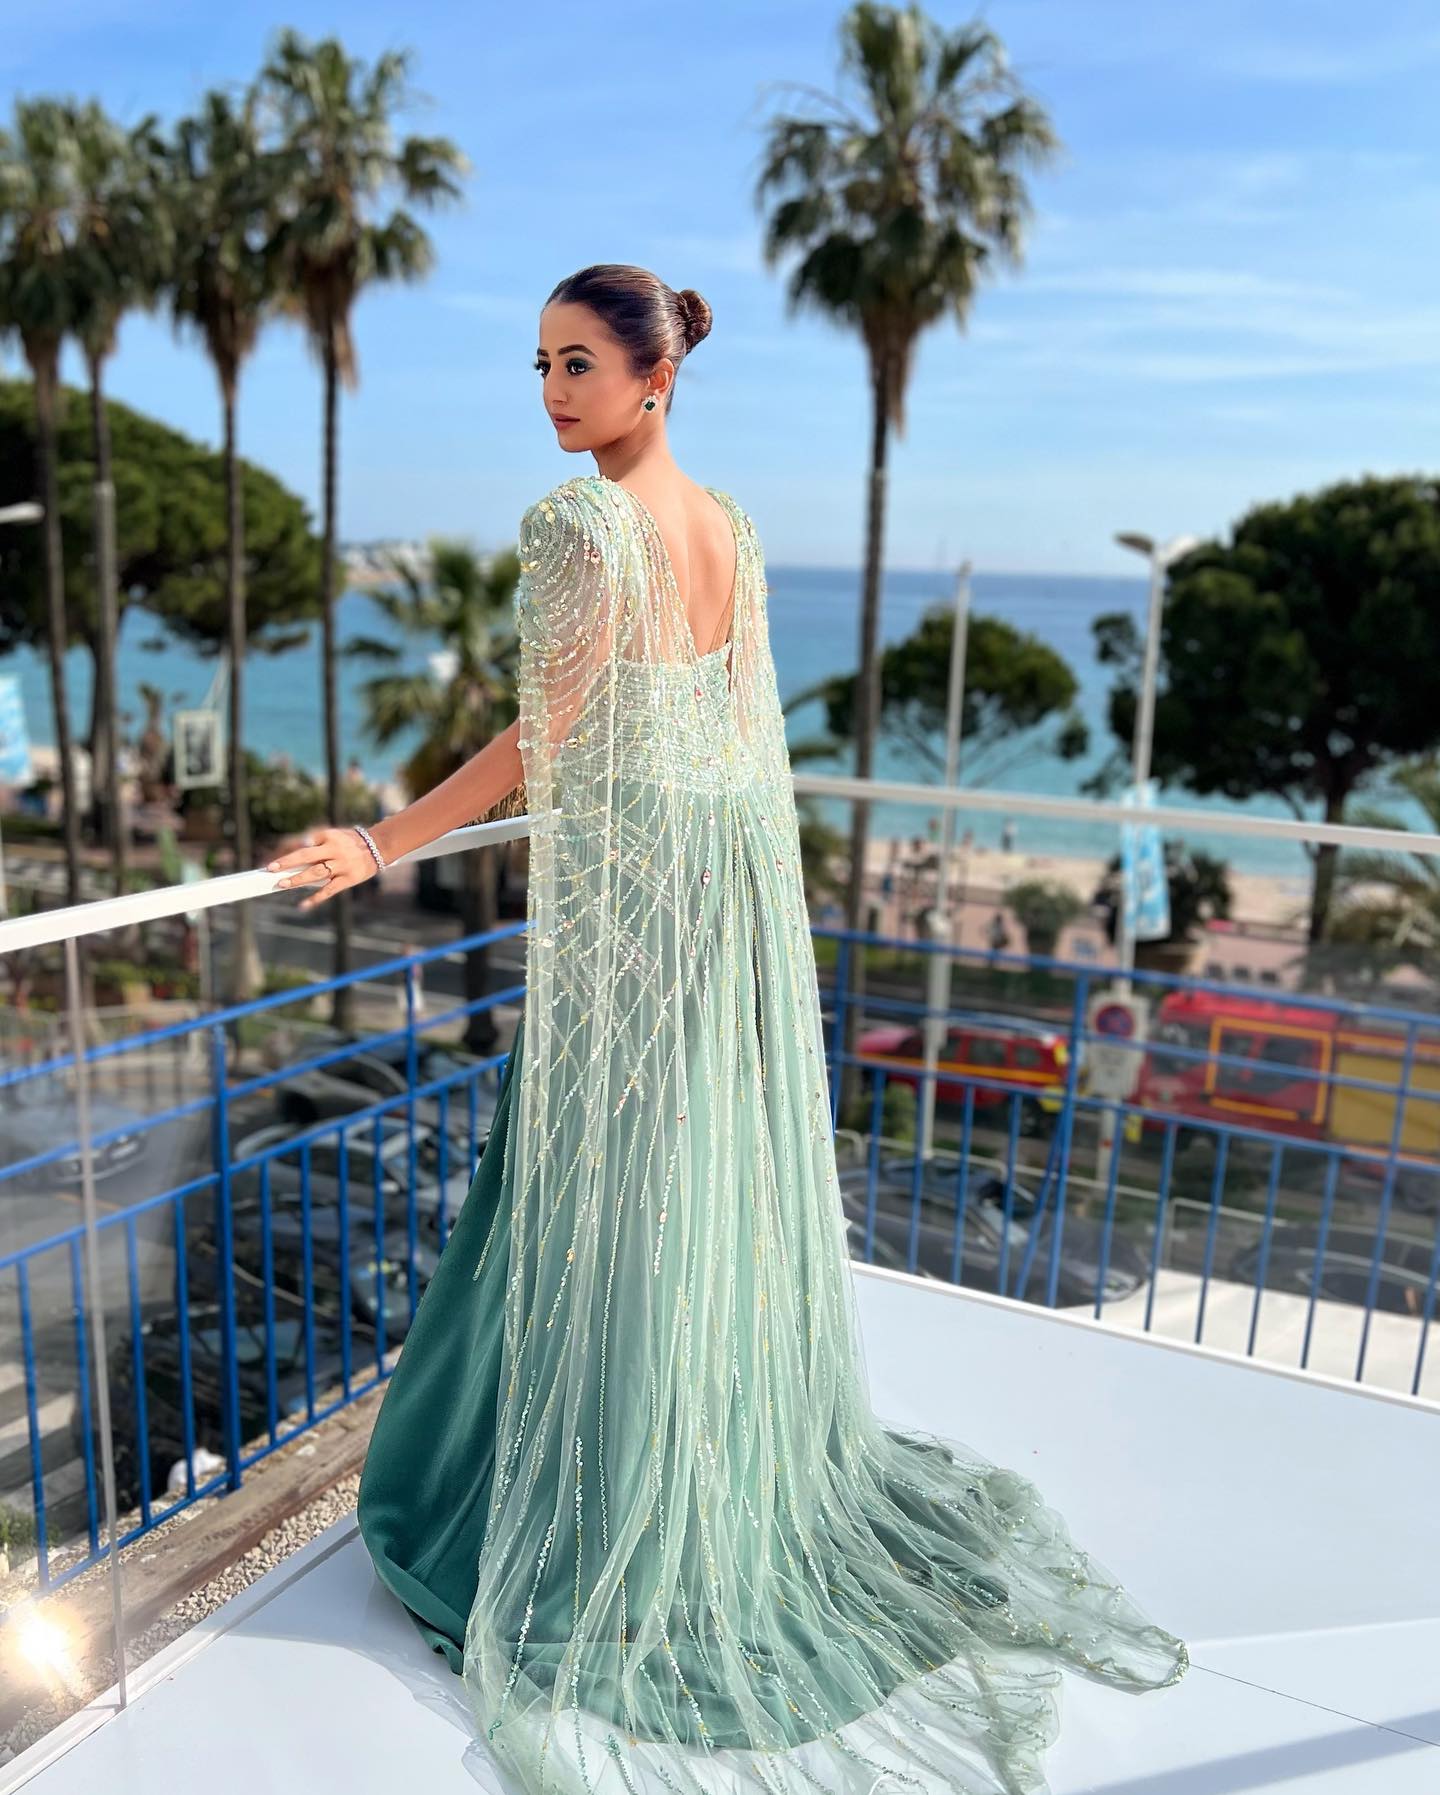 Helly Shah in a Glitzy Green Shimmery Gown Makes a Stylish Debut at Cannes  2022| See Photos